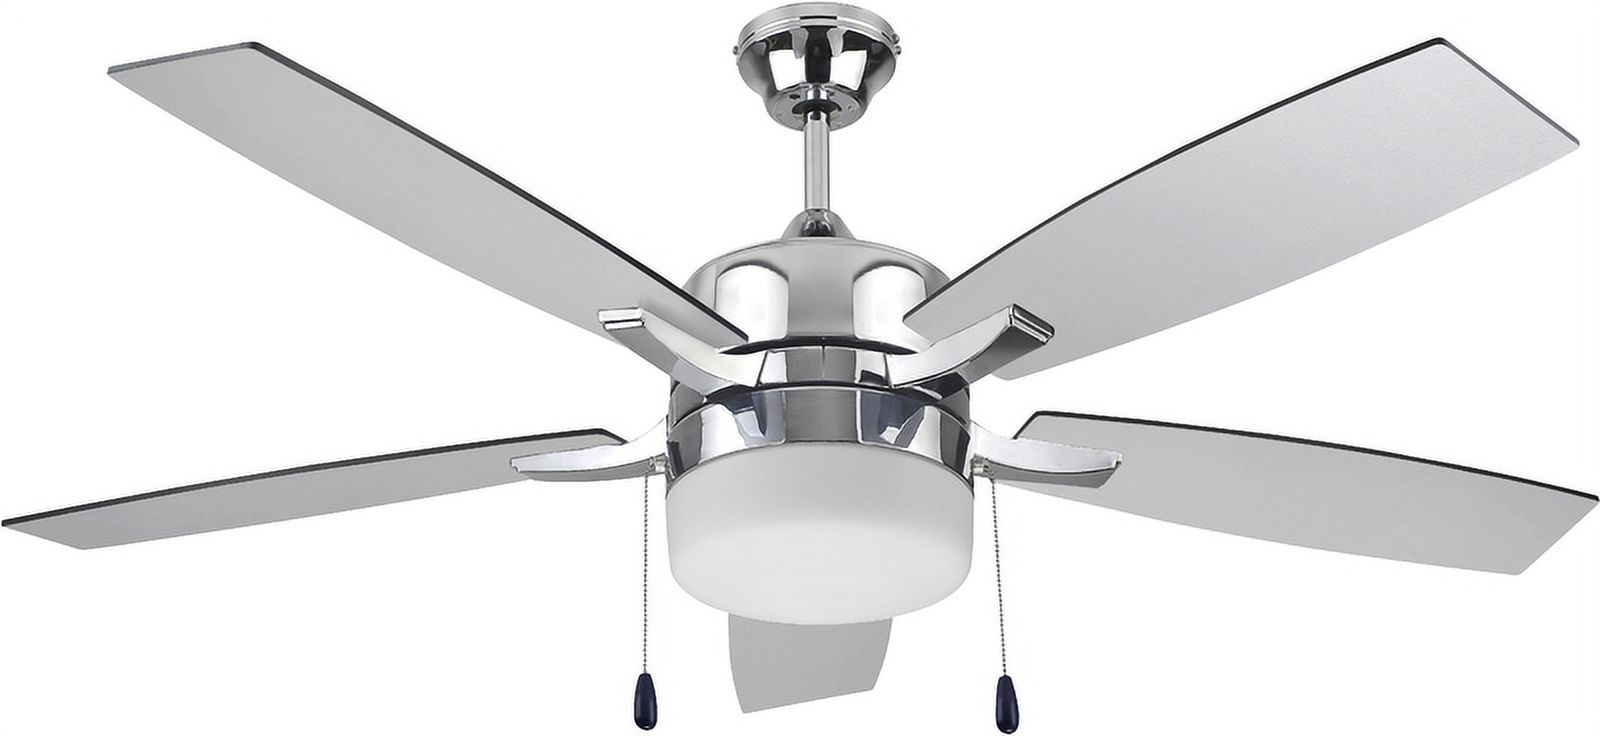 Hardware House Breckenridge 52," 5 Blade, Triple Mount Ceiling Fan 25-1945 with Chrome Finish - image 2 of 2